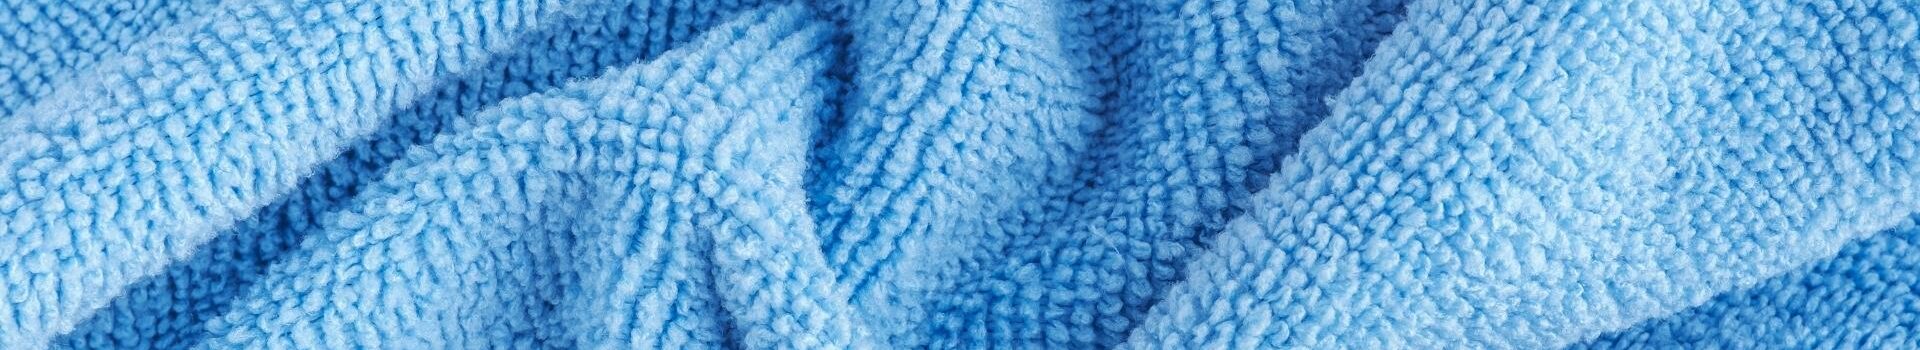 Very close up photo of light blue microfiber towel structure